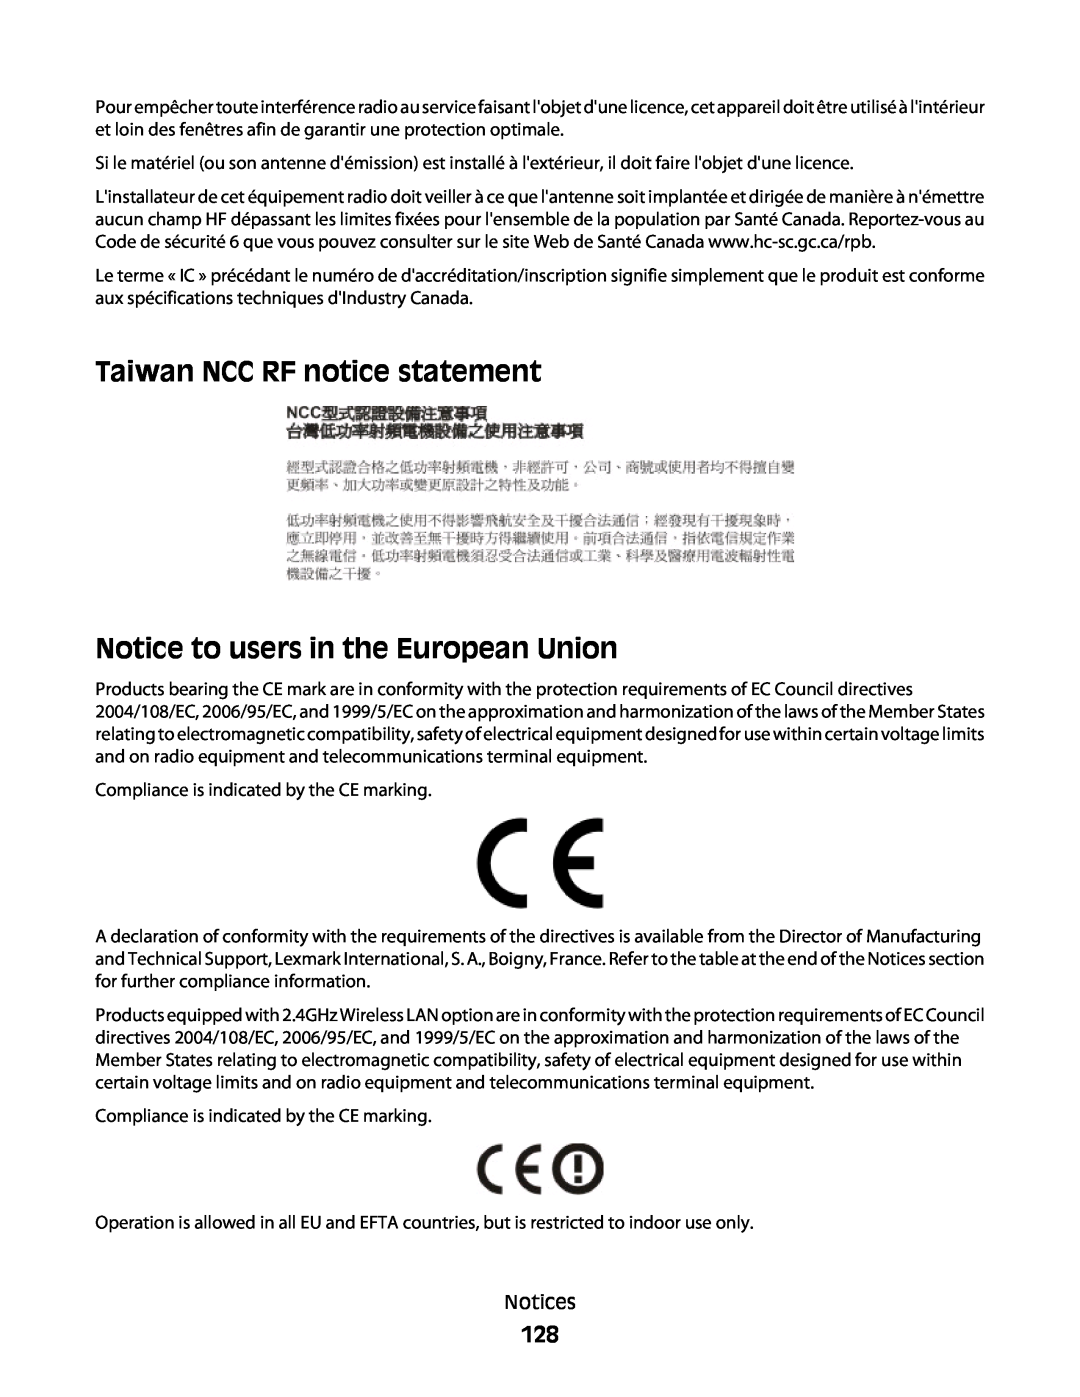 Lexmark 101, 10E manual Taiwan NCC RF notice statement, Notice to users in the European Union 